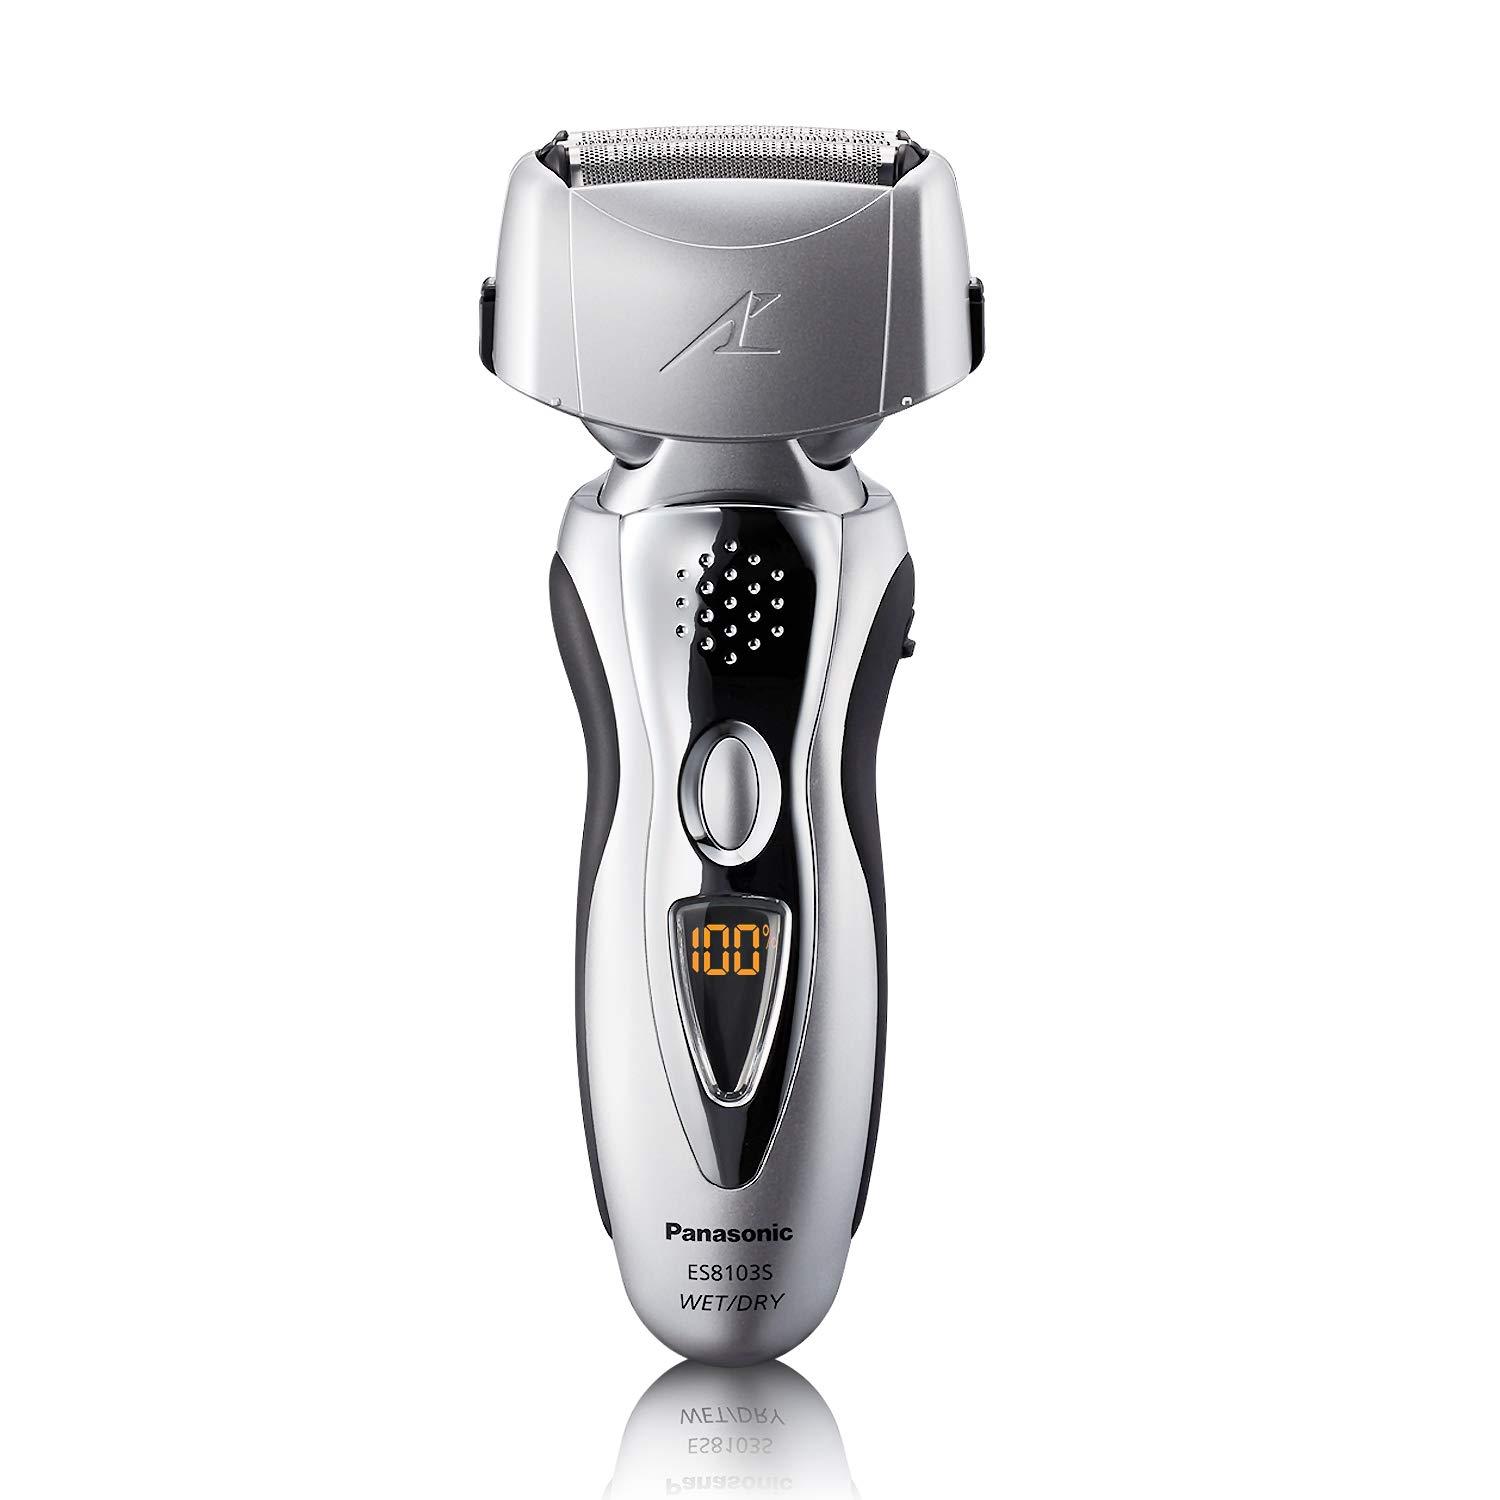 Panasonic Arc3 Wet Dry Electric Shaver and Trimmer for $49.99 Shipped